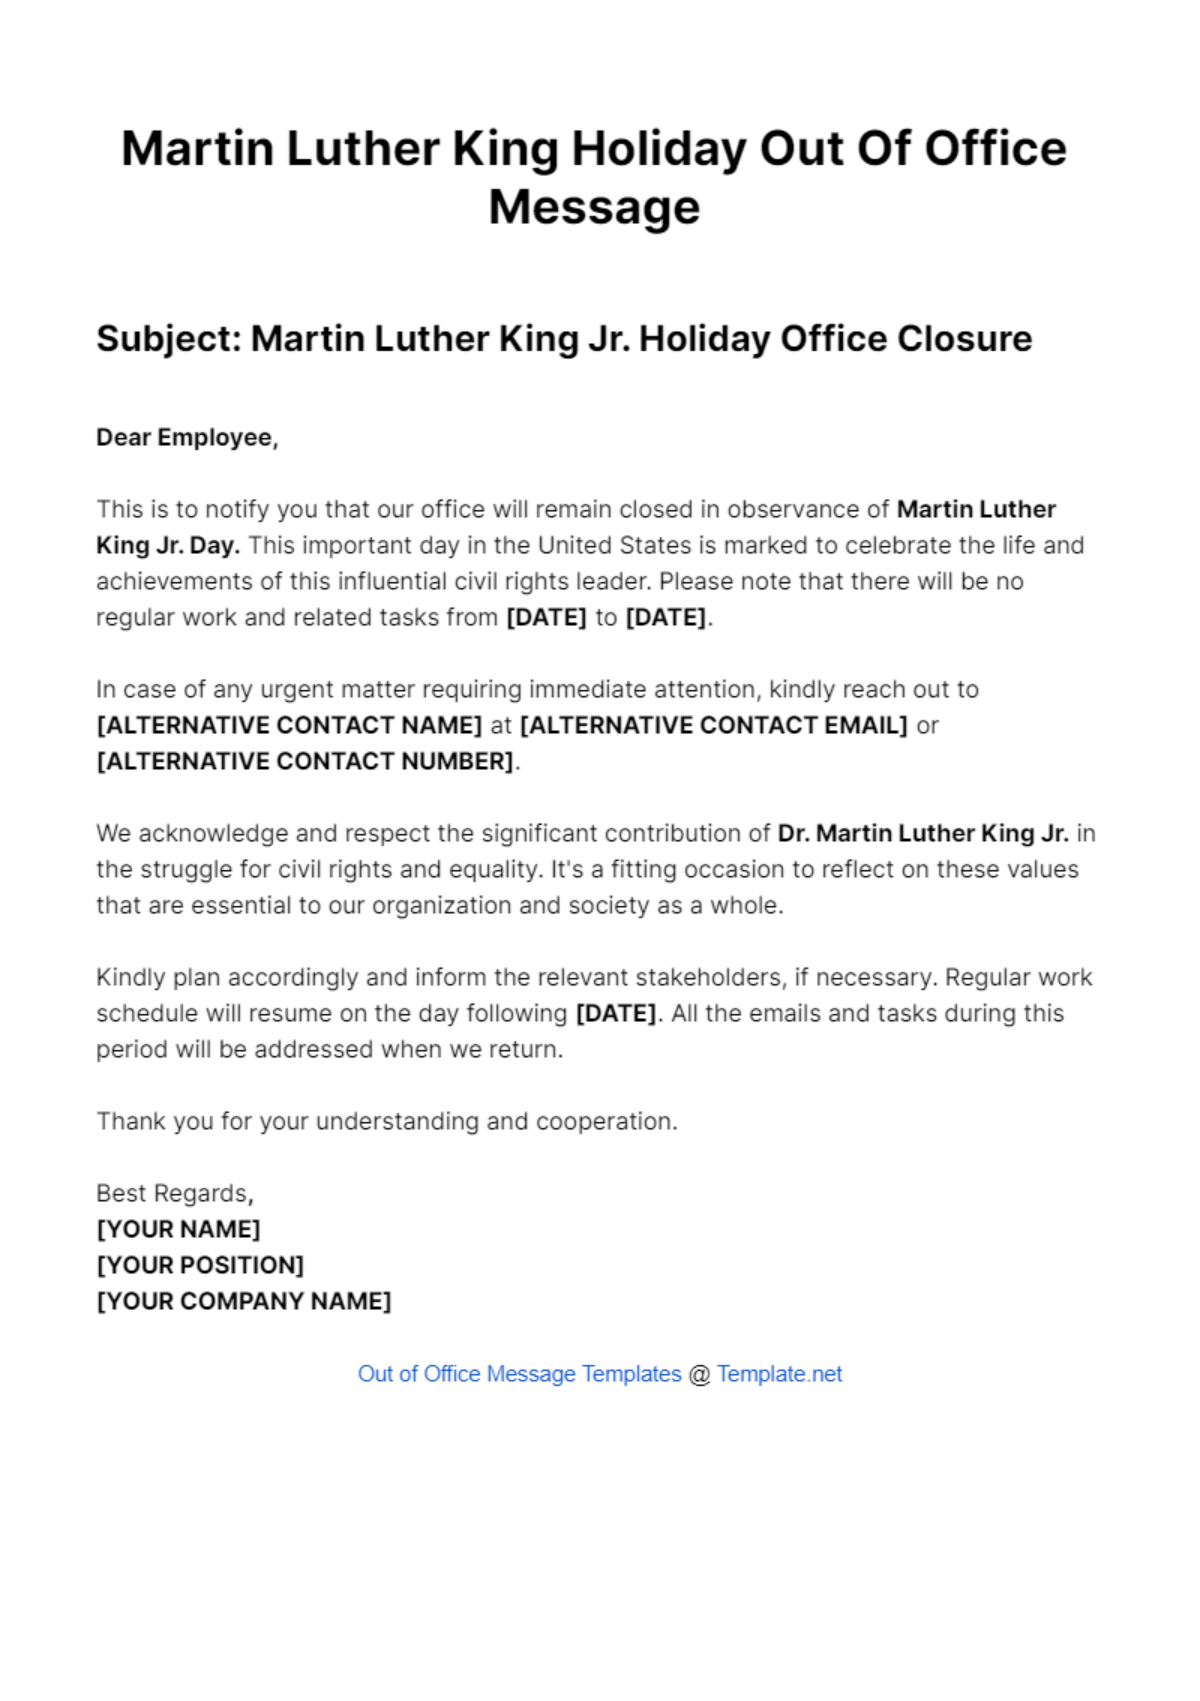 Martin Luther King Holiday Out Of Office Message Template